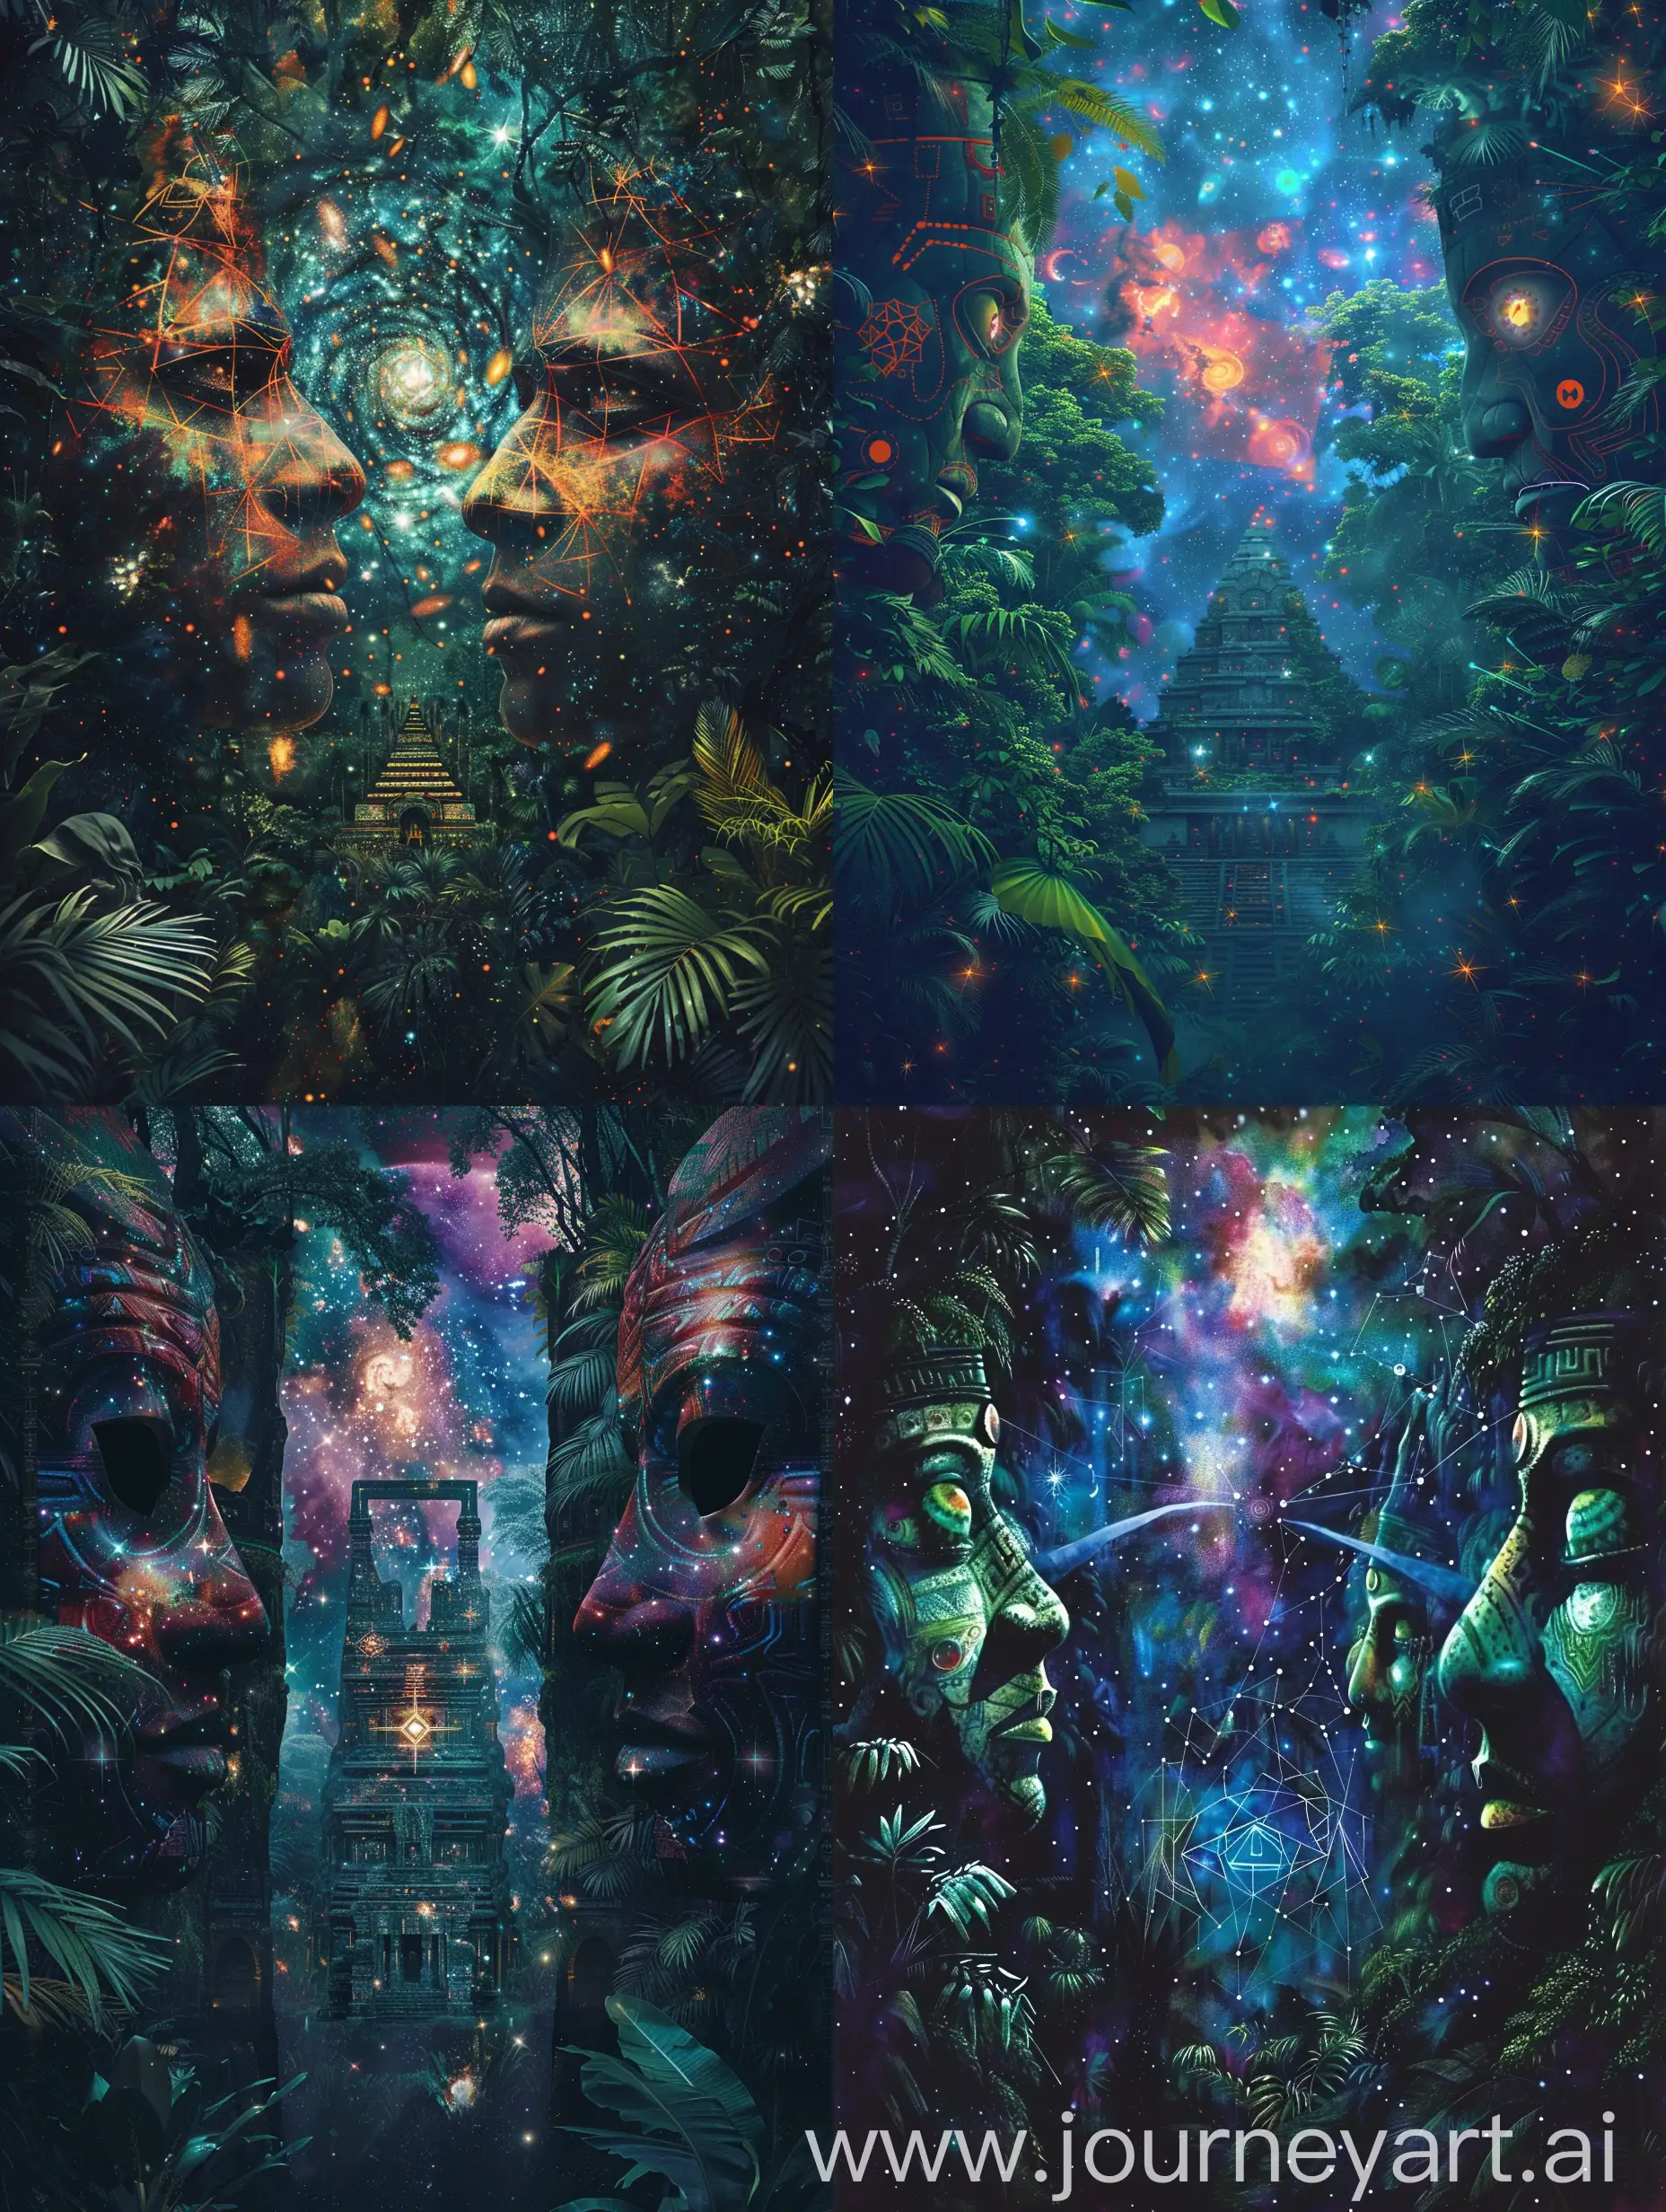 Dark forest jungle with tribal faces both sides ancient temple with galxy hols with stars & ritual yantra in geometric patterns , exploring an abstract universe filled with vibrant, nebulous formations, exuding a sense of joy